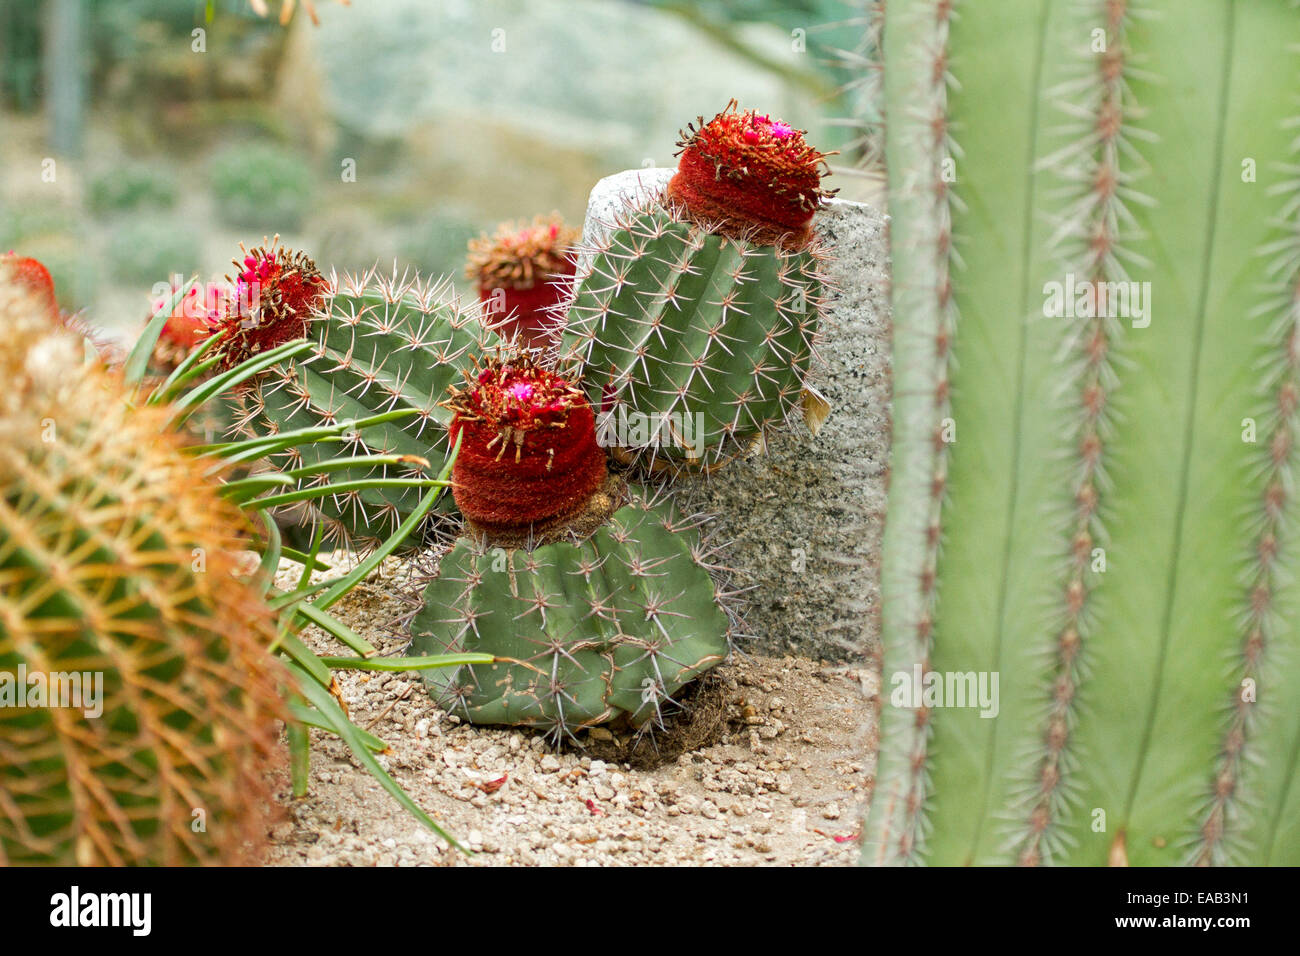 Group of Melocactus, Turk's Cap cactus, growing and with red flowers in Sun Pavilion at Gardens By The Bay in Singapore Stock Photo